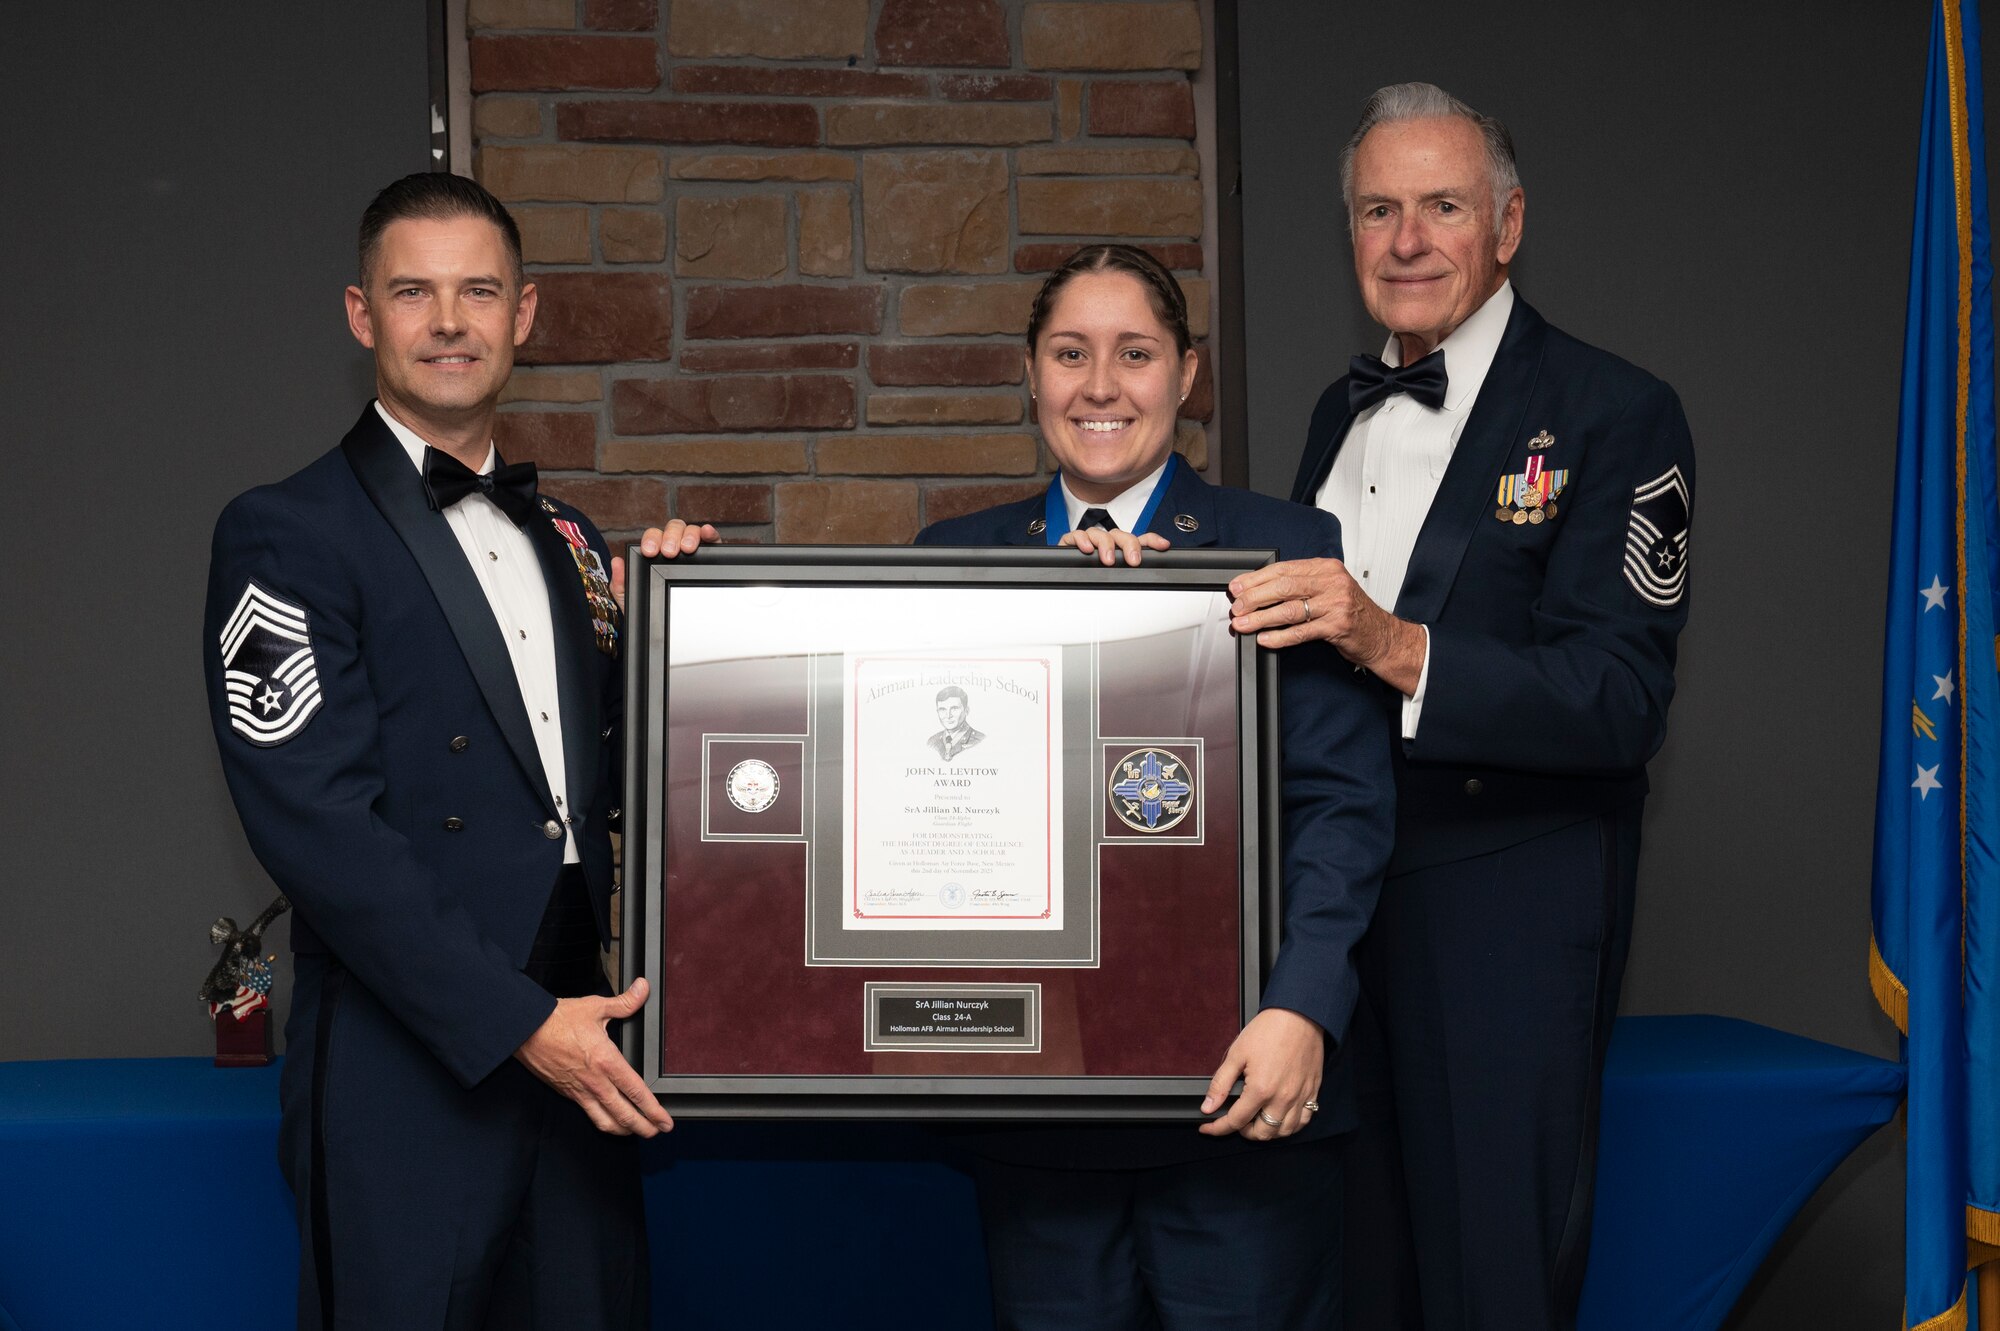 U.S. Air Force Senior Airman Jillian Nurczyk, center, Airman Leadership Graduate, accepts the John L. Levitow Award from Chief Master Sgt. Joshua Ziriak, left, and Retired Chief Master Sgt. Richard McElderry, during the graduation of Joel C. Mayo ALS Class 24-A at Holloman Air Force Base, New Mexico, Nov. 2,, 2023. The John L. Levitow award is presented to the student demonstrating the highest level of leadership and scholastic performance and is partially determined by the assignment of points by their peers. (U.S. Air Force photo by Airman 1st Class Michelle Ferrari)